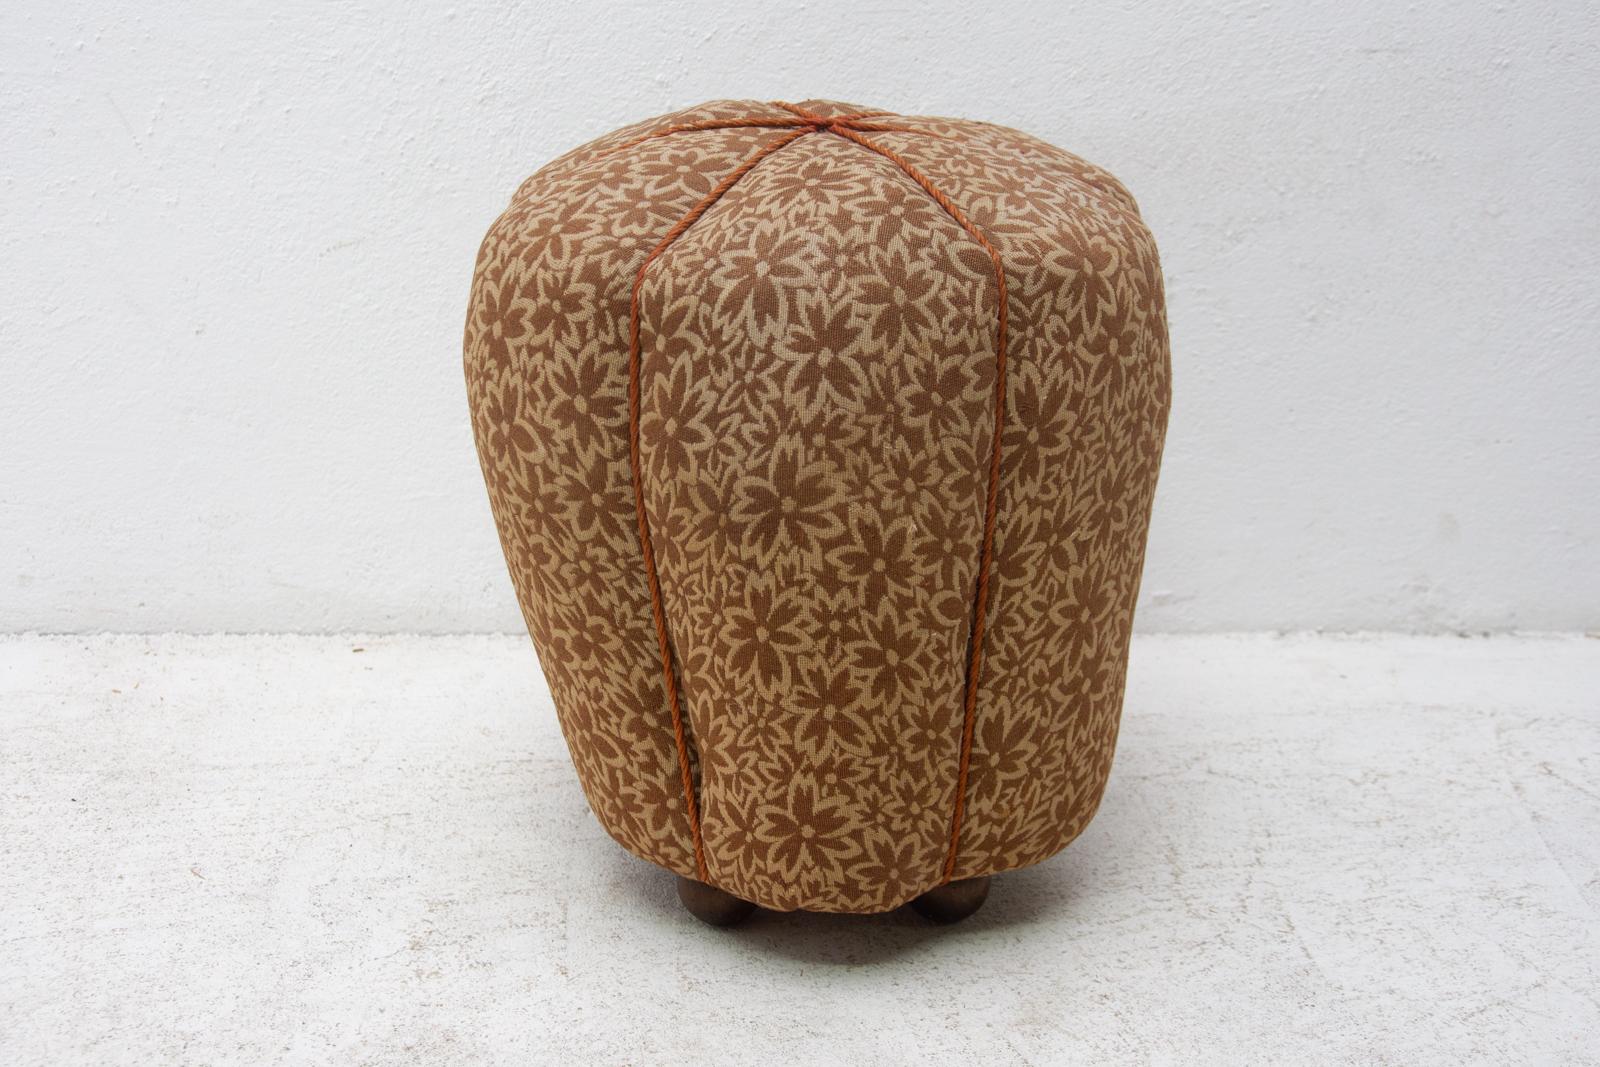 This pouffe(footstool) was designed by Jindrich Halabala and produced by UP Závody in the 1950s. Very comfortable retro chic in the shape of a raspberry. The upholstery is in good condition, the stool has slightly protruding springs in the seating